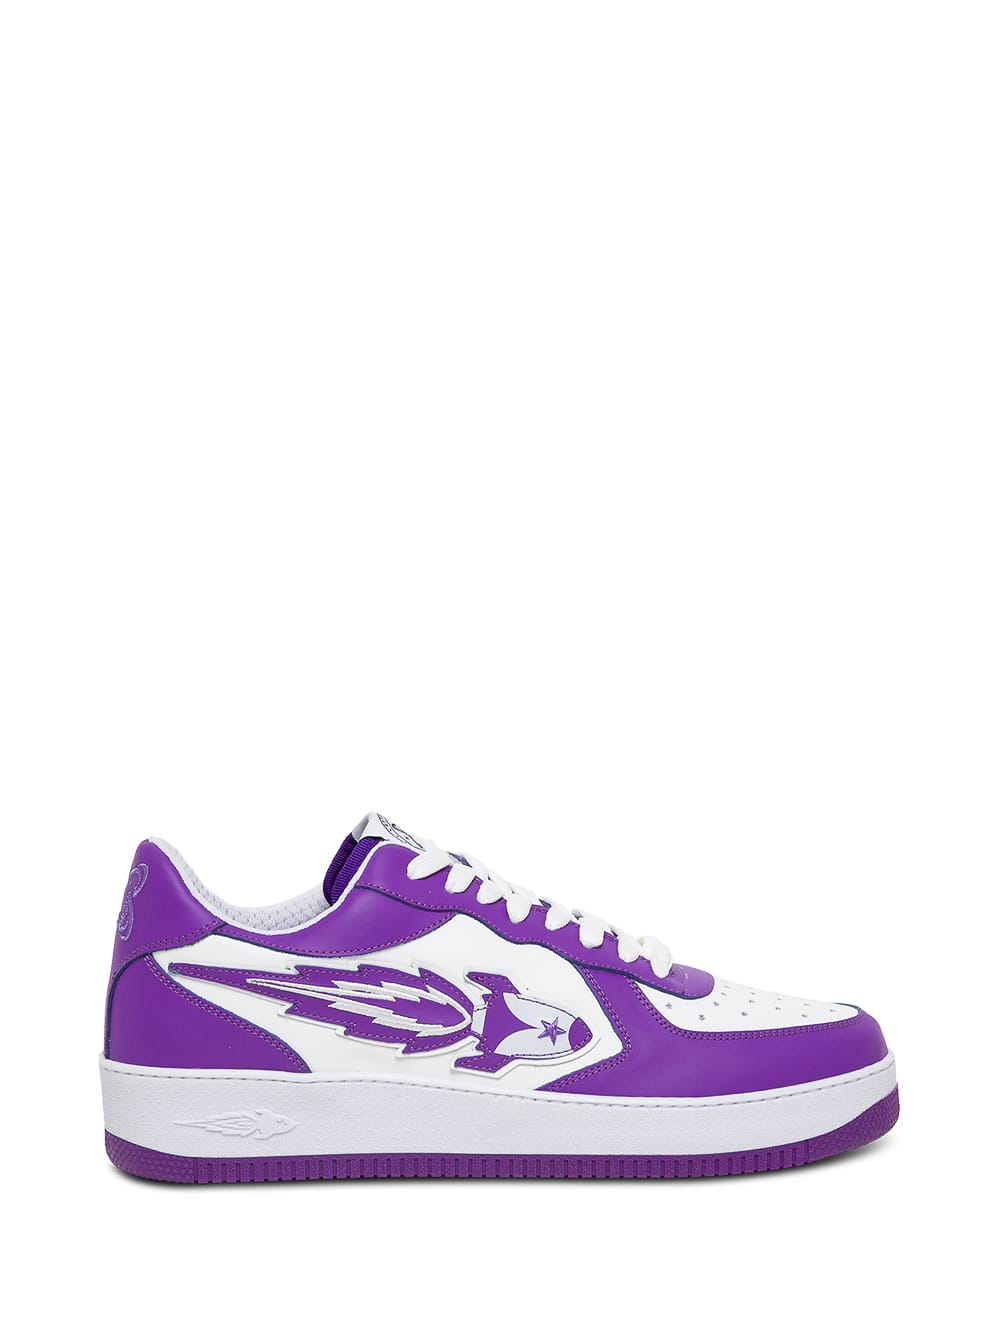 Enterprise Japan White And Purple Leather Sneakers